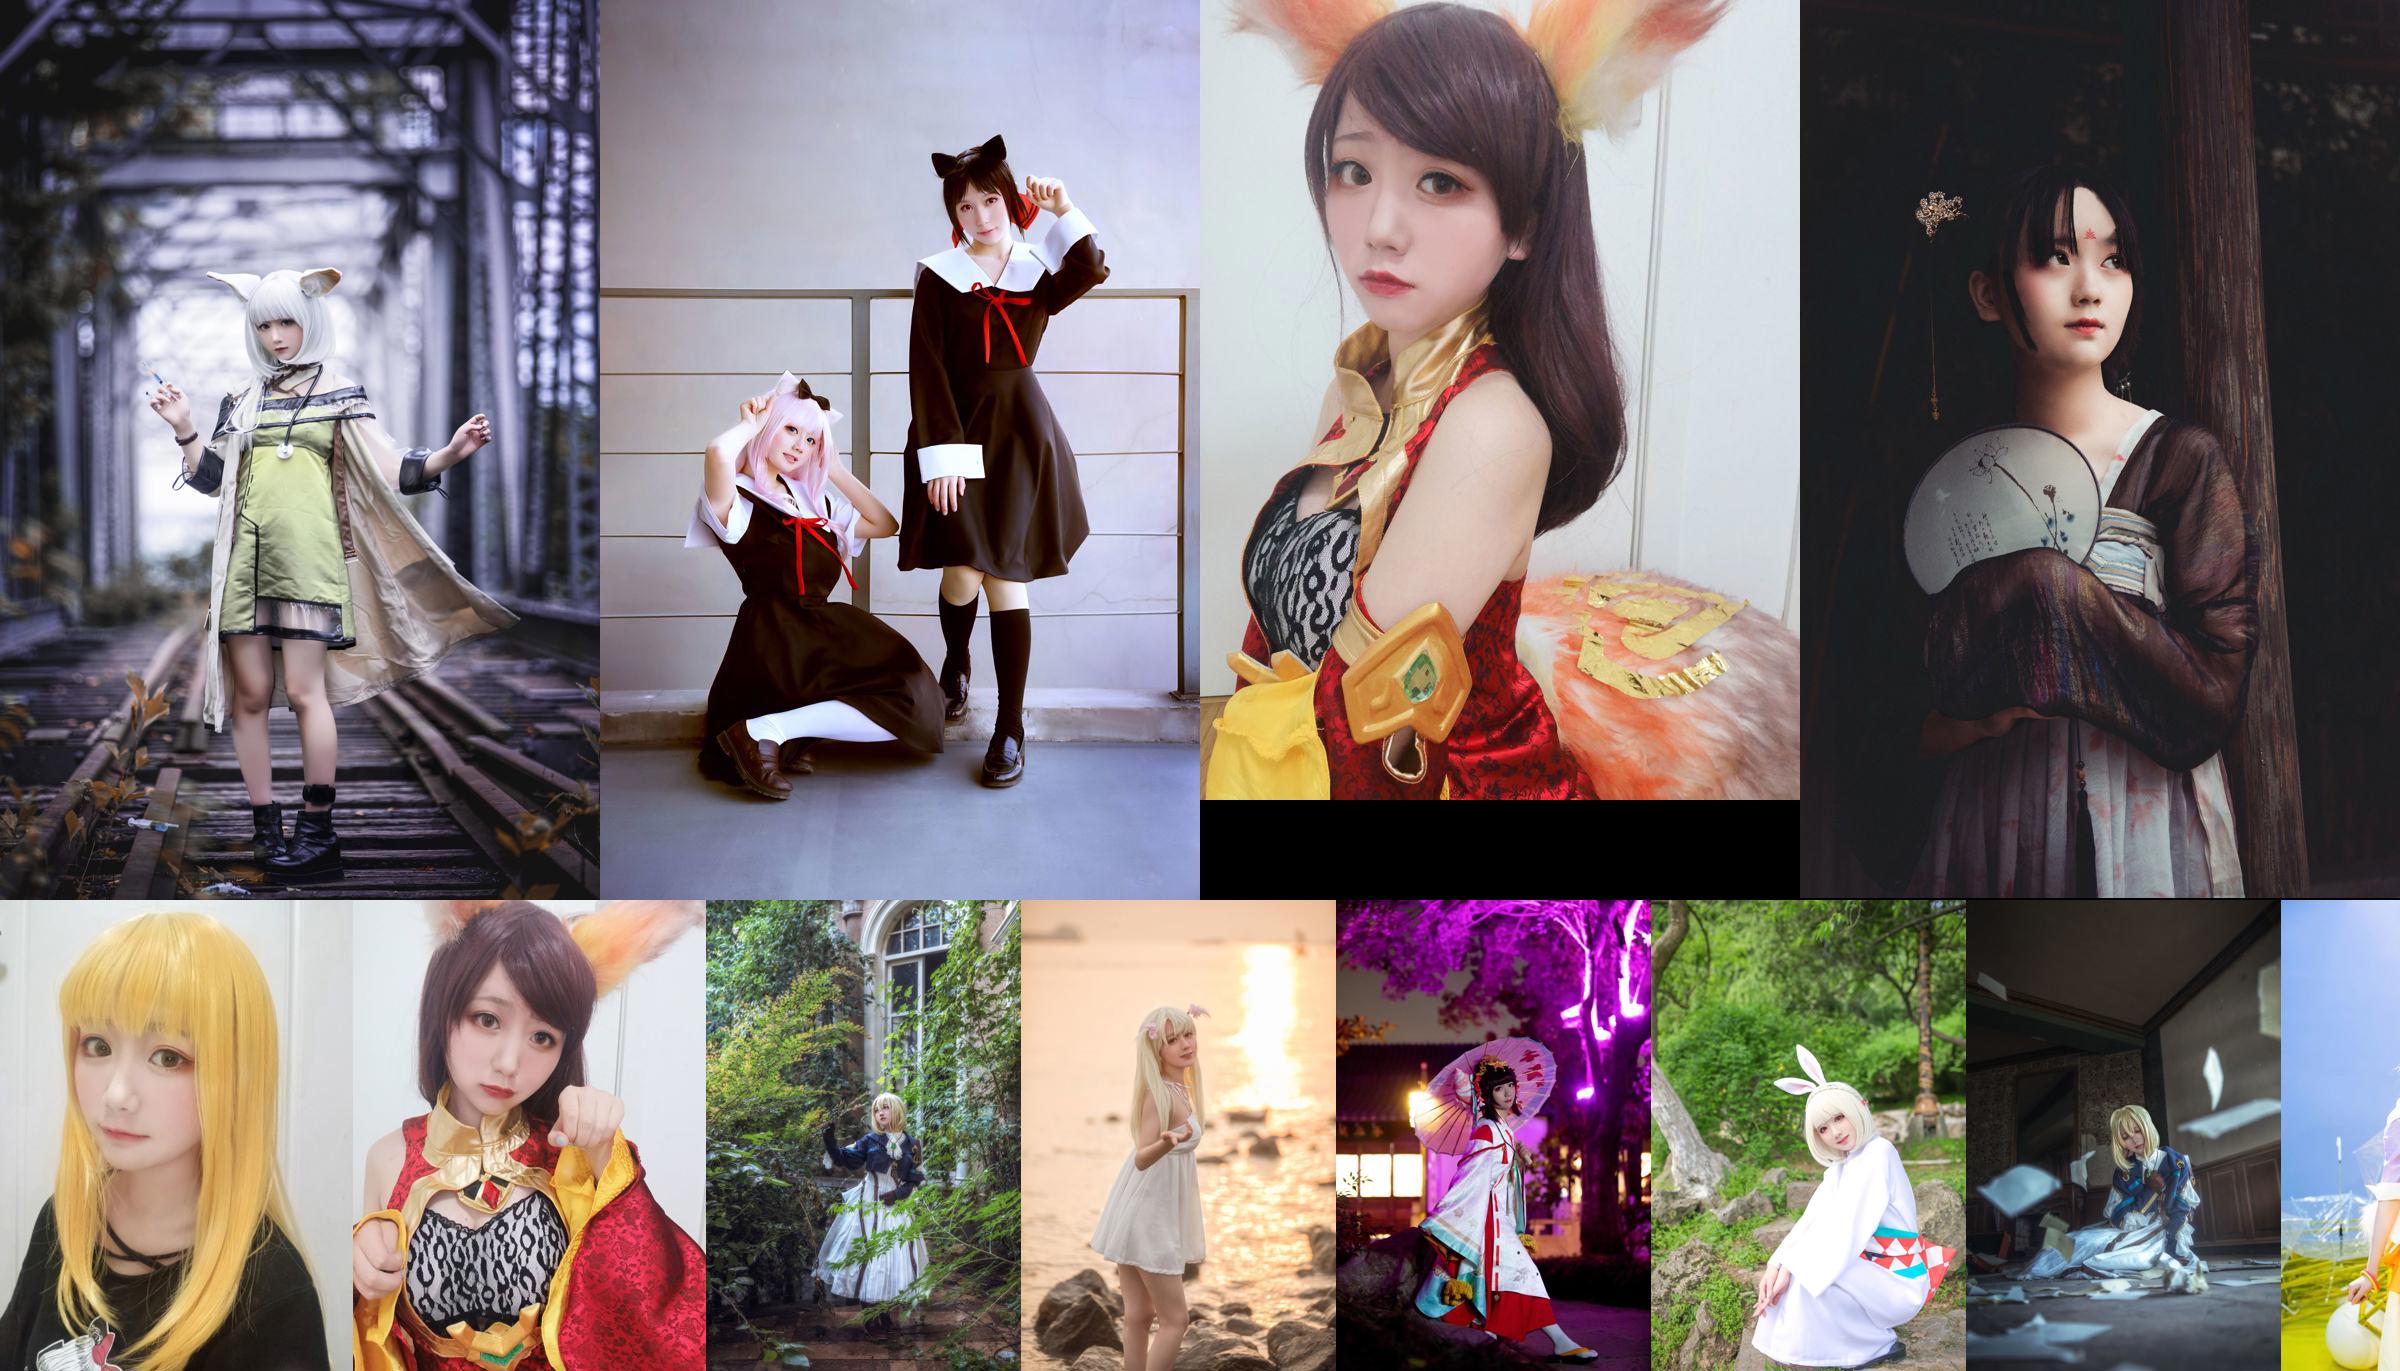 [Cosplay Photo] Anime blogger Xianyin sic - RE's life in another world from scratch Rem cat pajamas No.318c66 Page 1